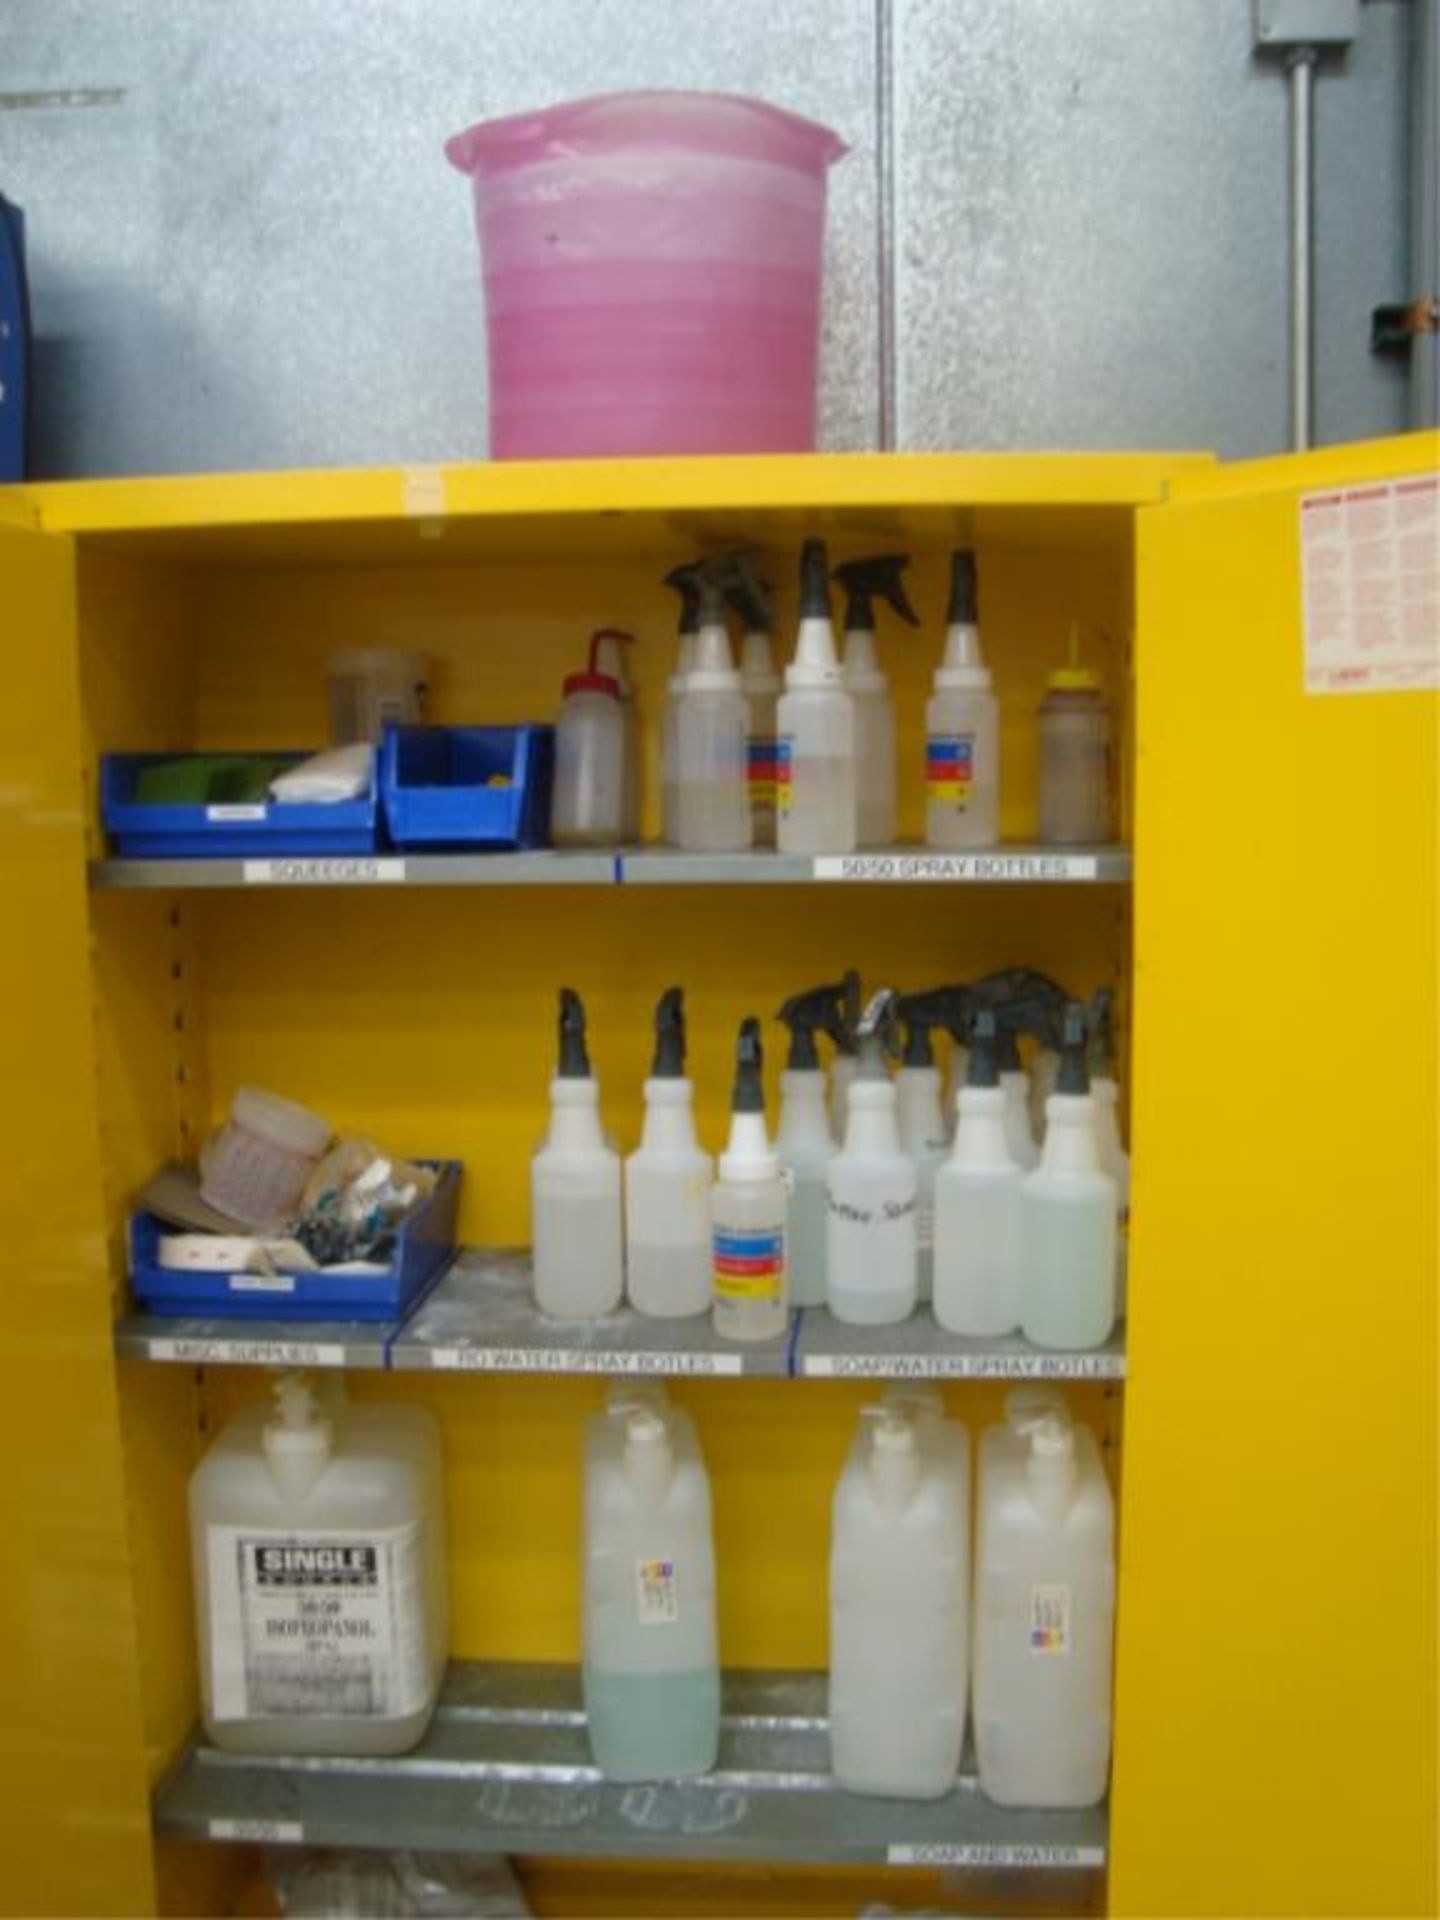 Flammable Liquids Storage Cabinet - Image 2 of 3